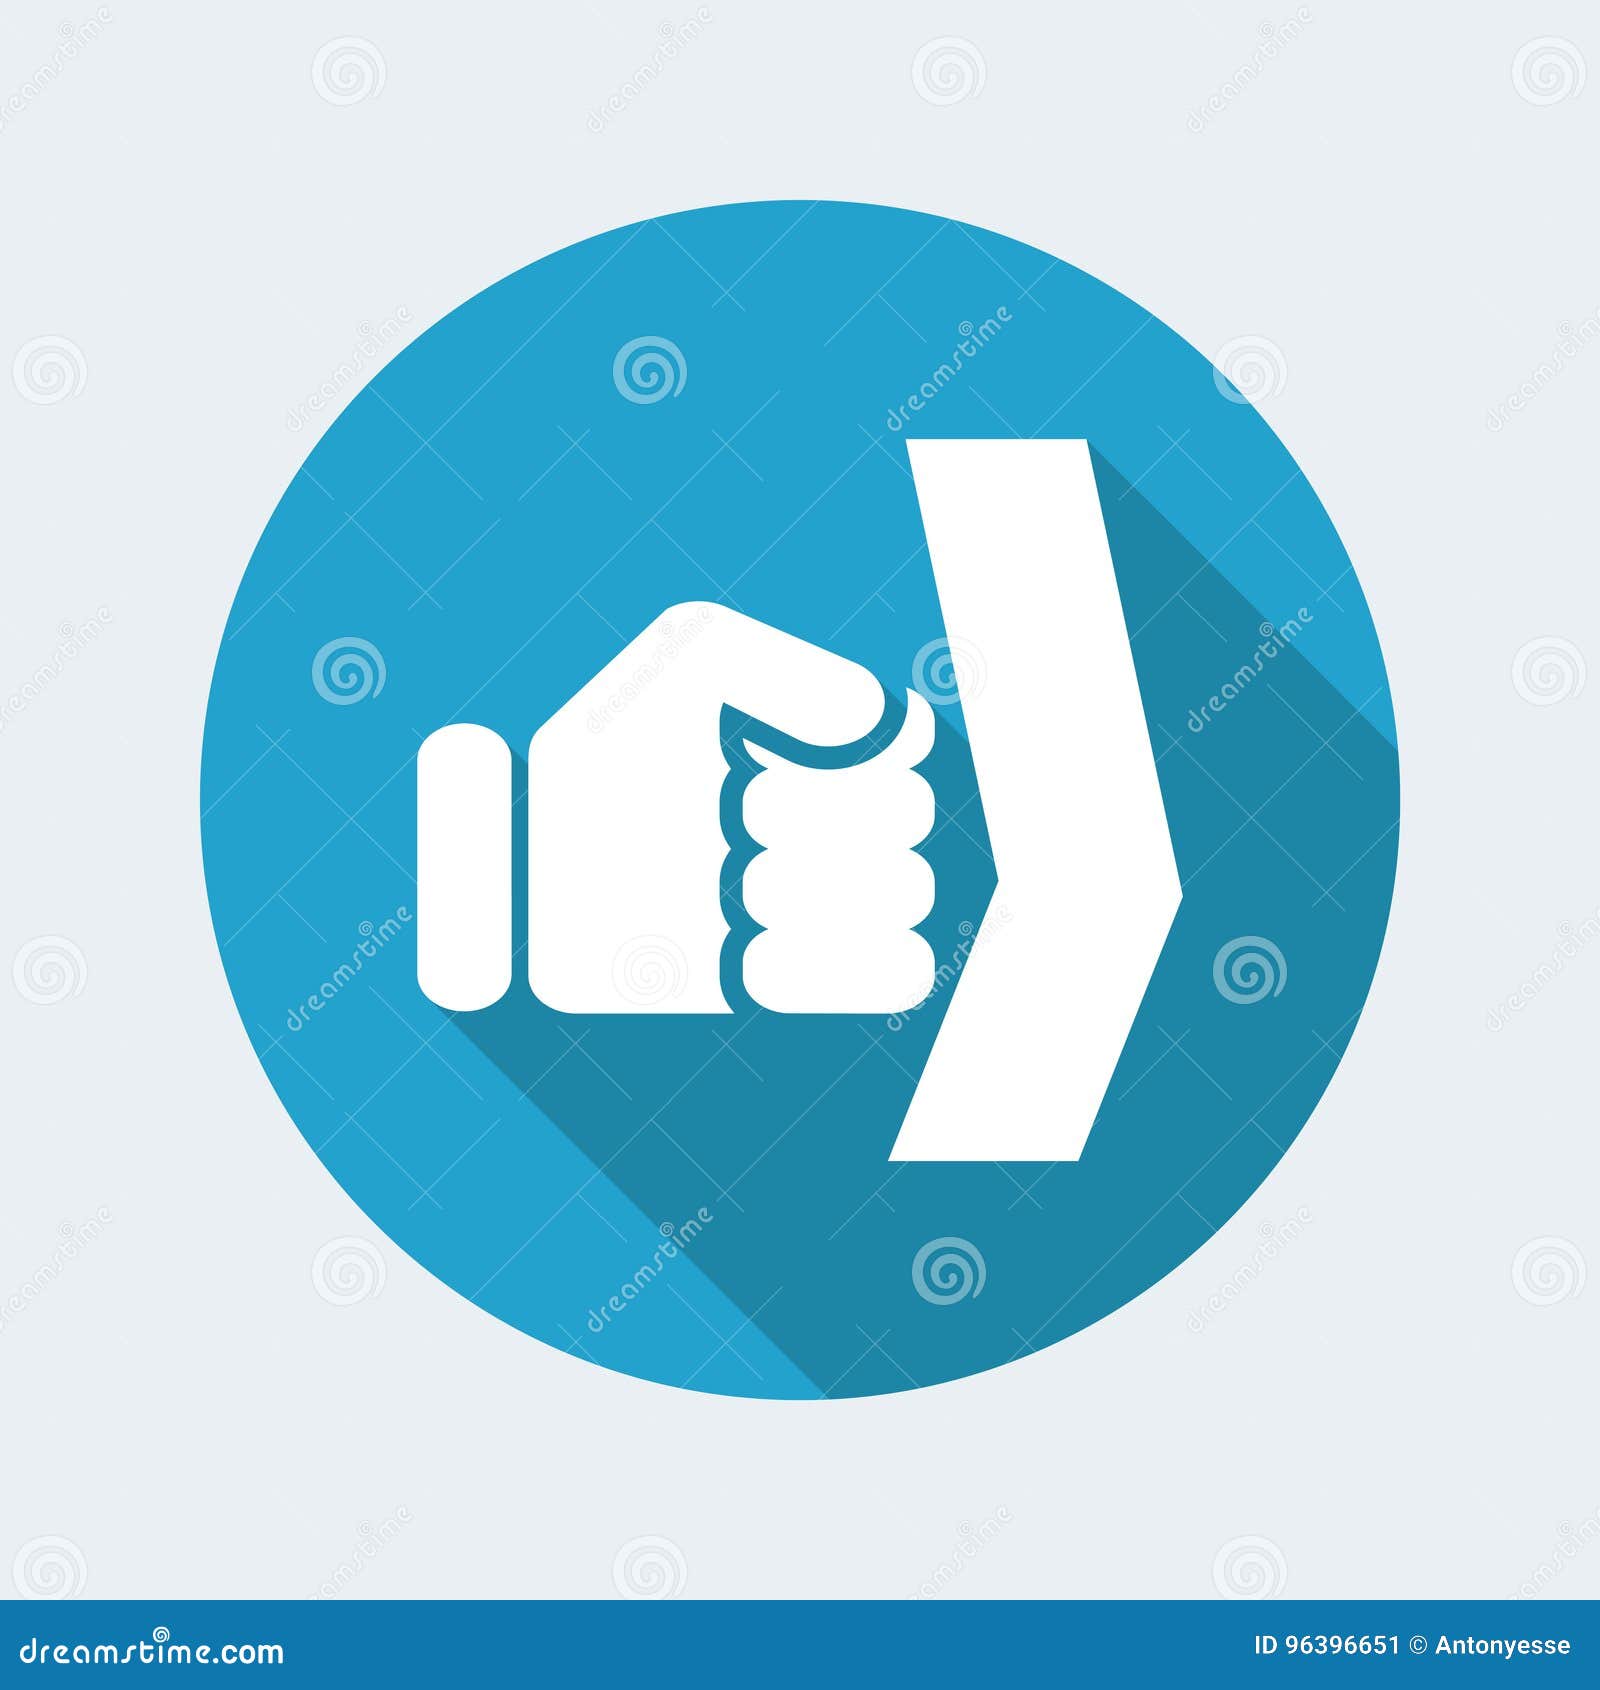 Vector Illustration Of Single Isolated Fist Icon Stock Vector